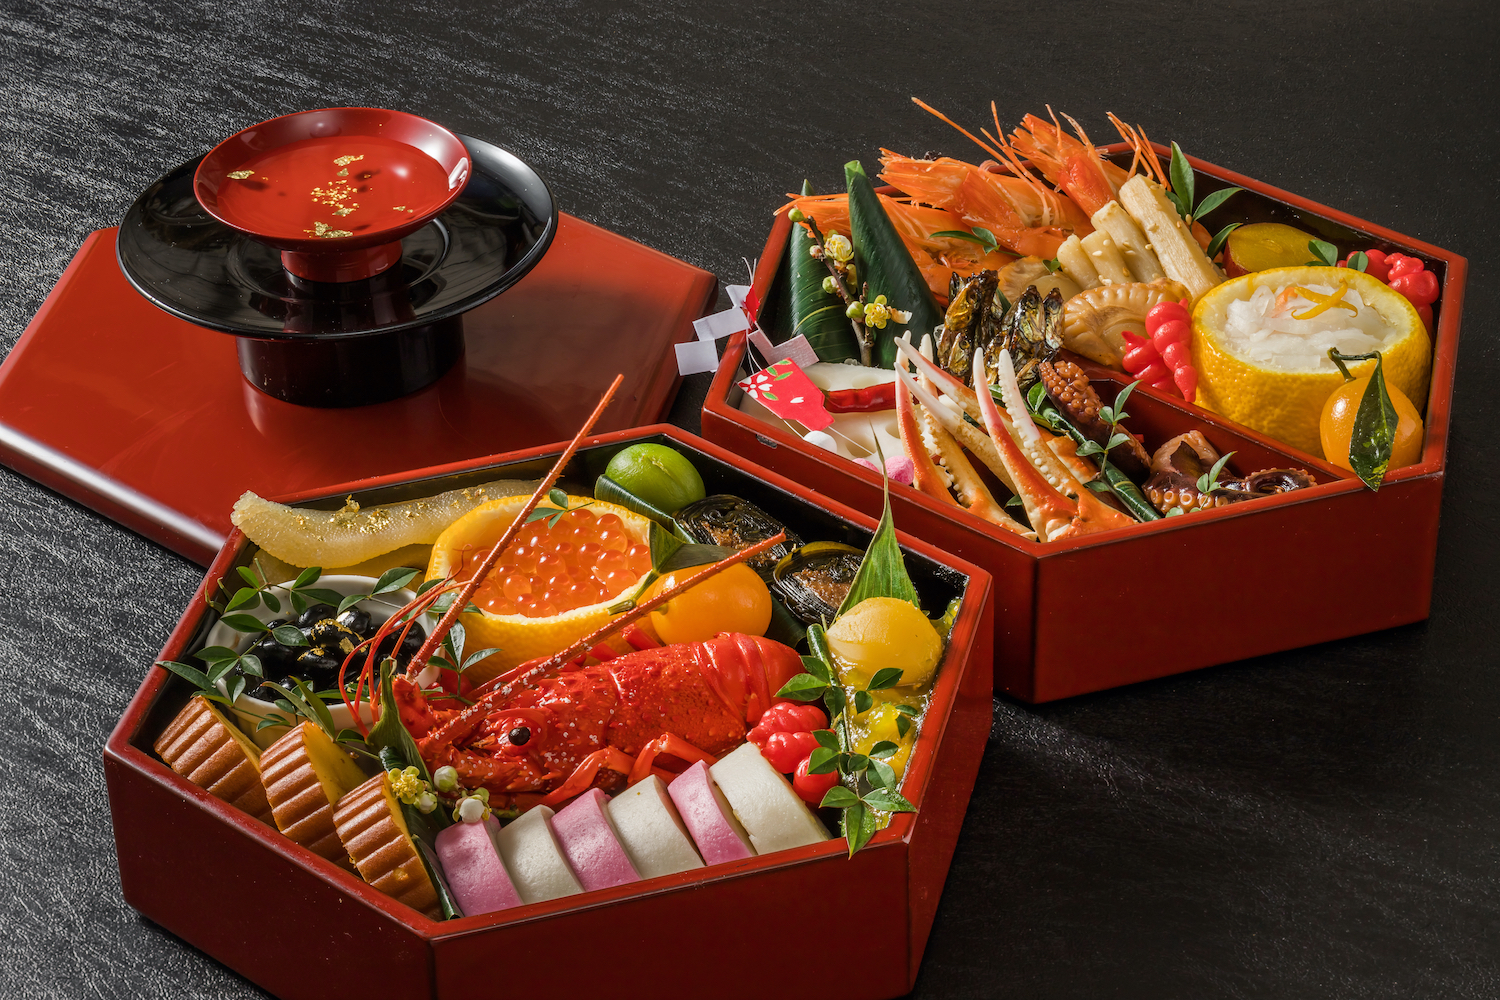 General Japanese New Year dishes (osechi) in hexagonal plates